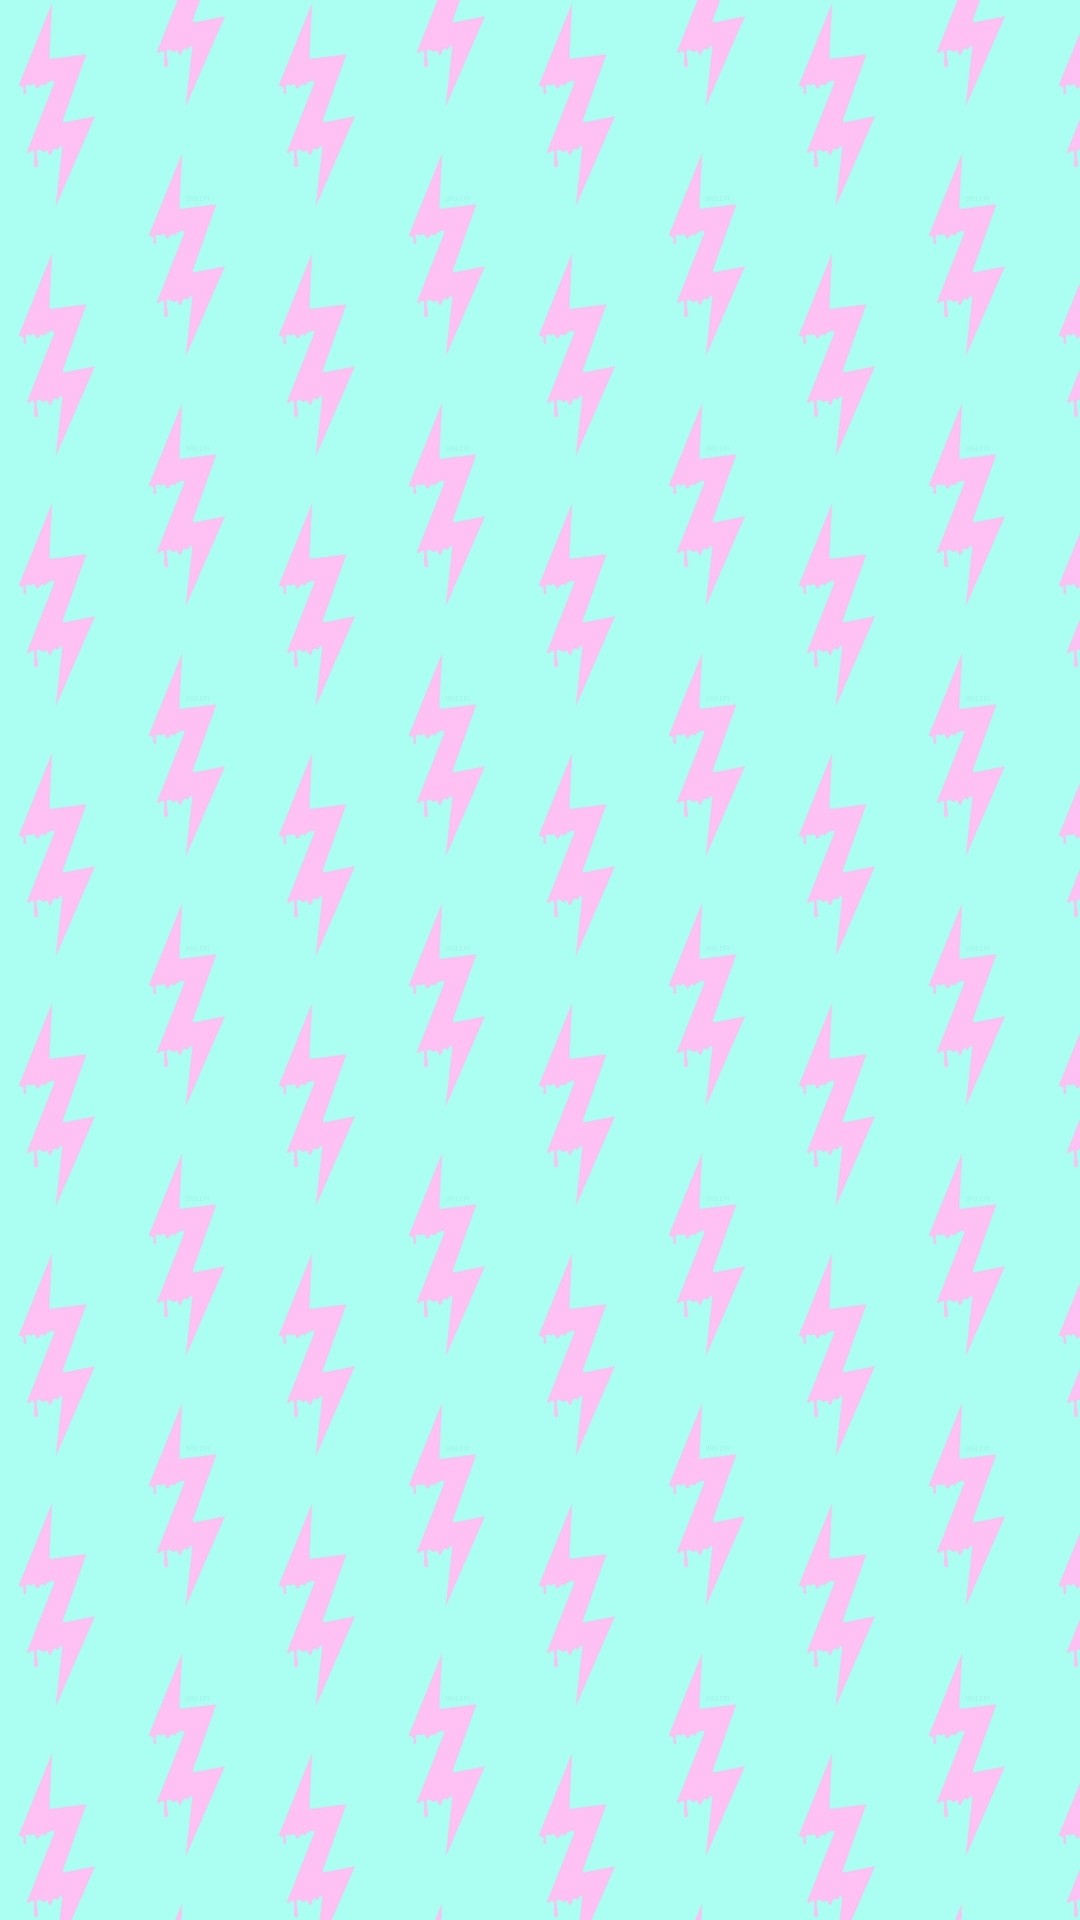 1080x1920 Pink Dripping Thunderbolt. Tap to see more pattern iPhone & Android  wallpapers, backgrounds,